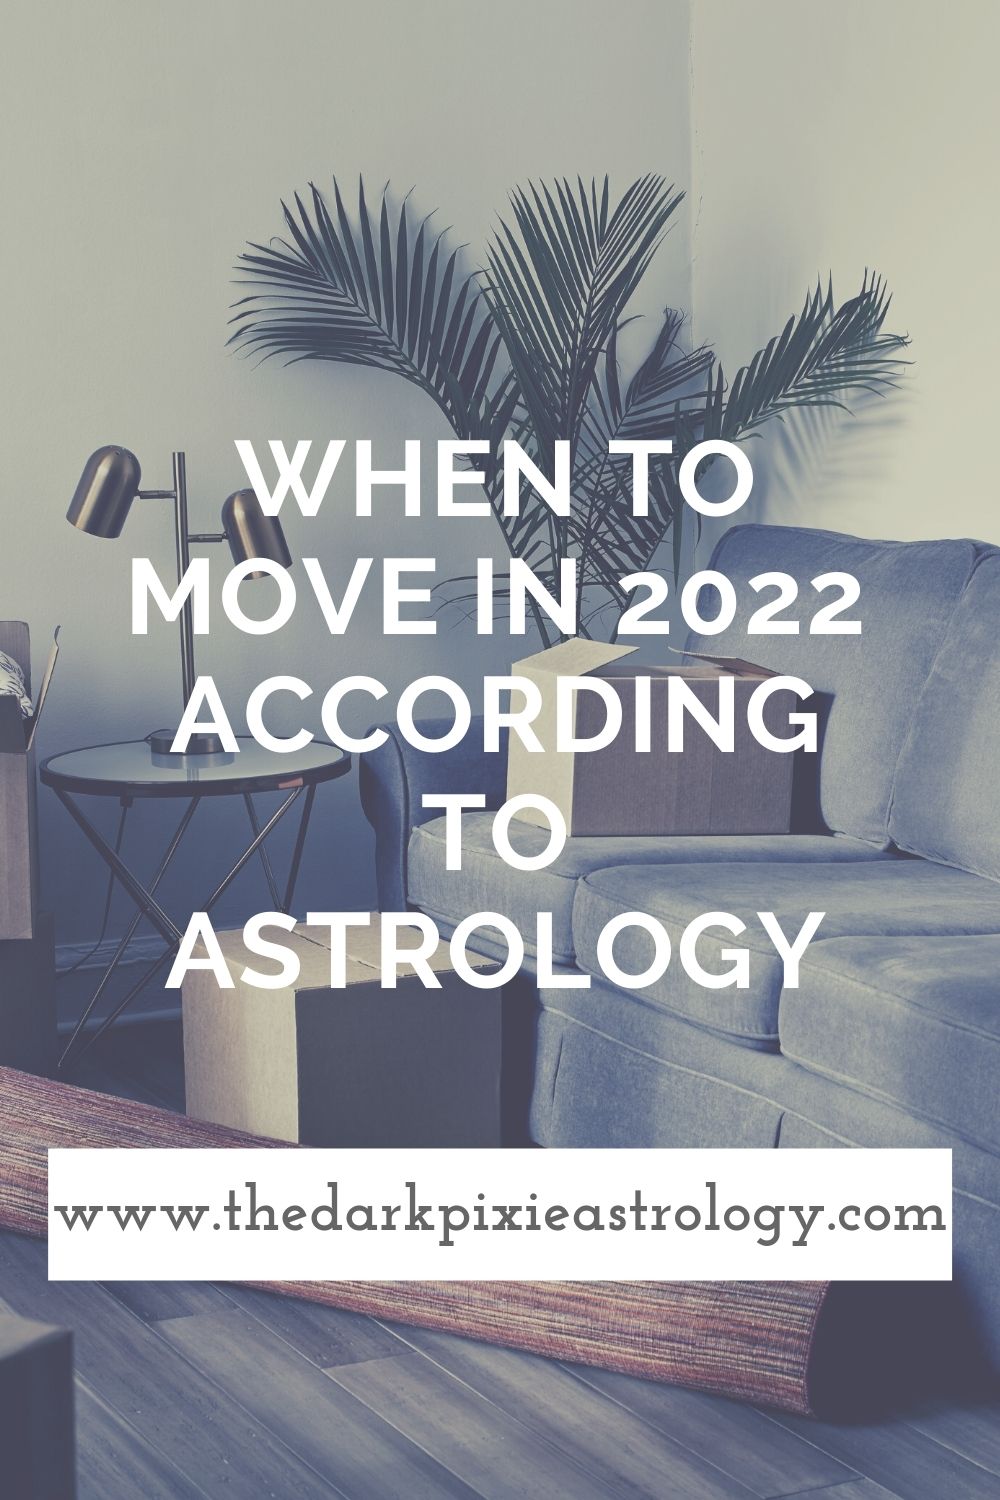 When to Move in 2022 According to Astrology - The Dark Pixie Astrology